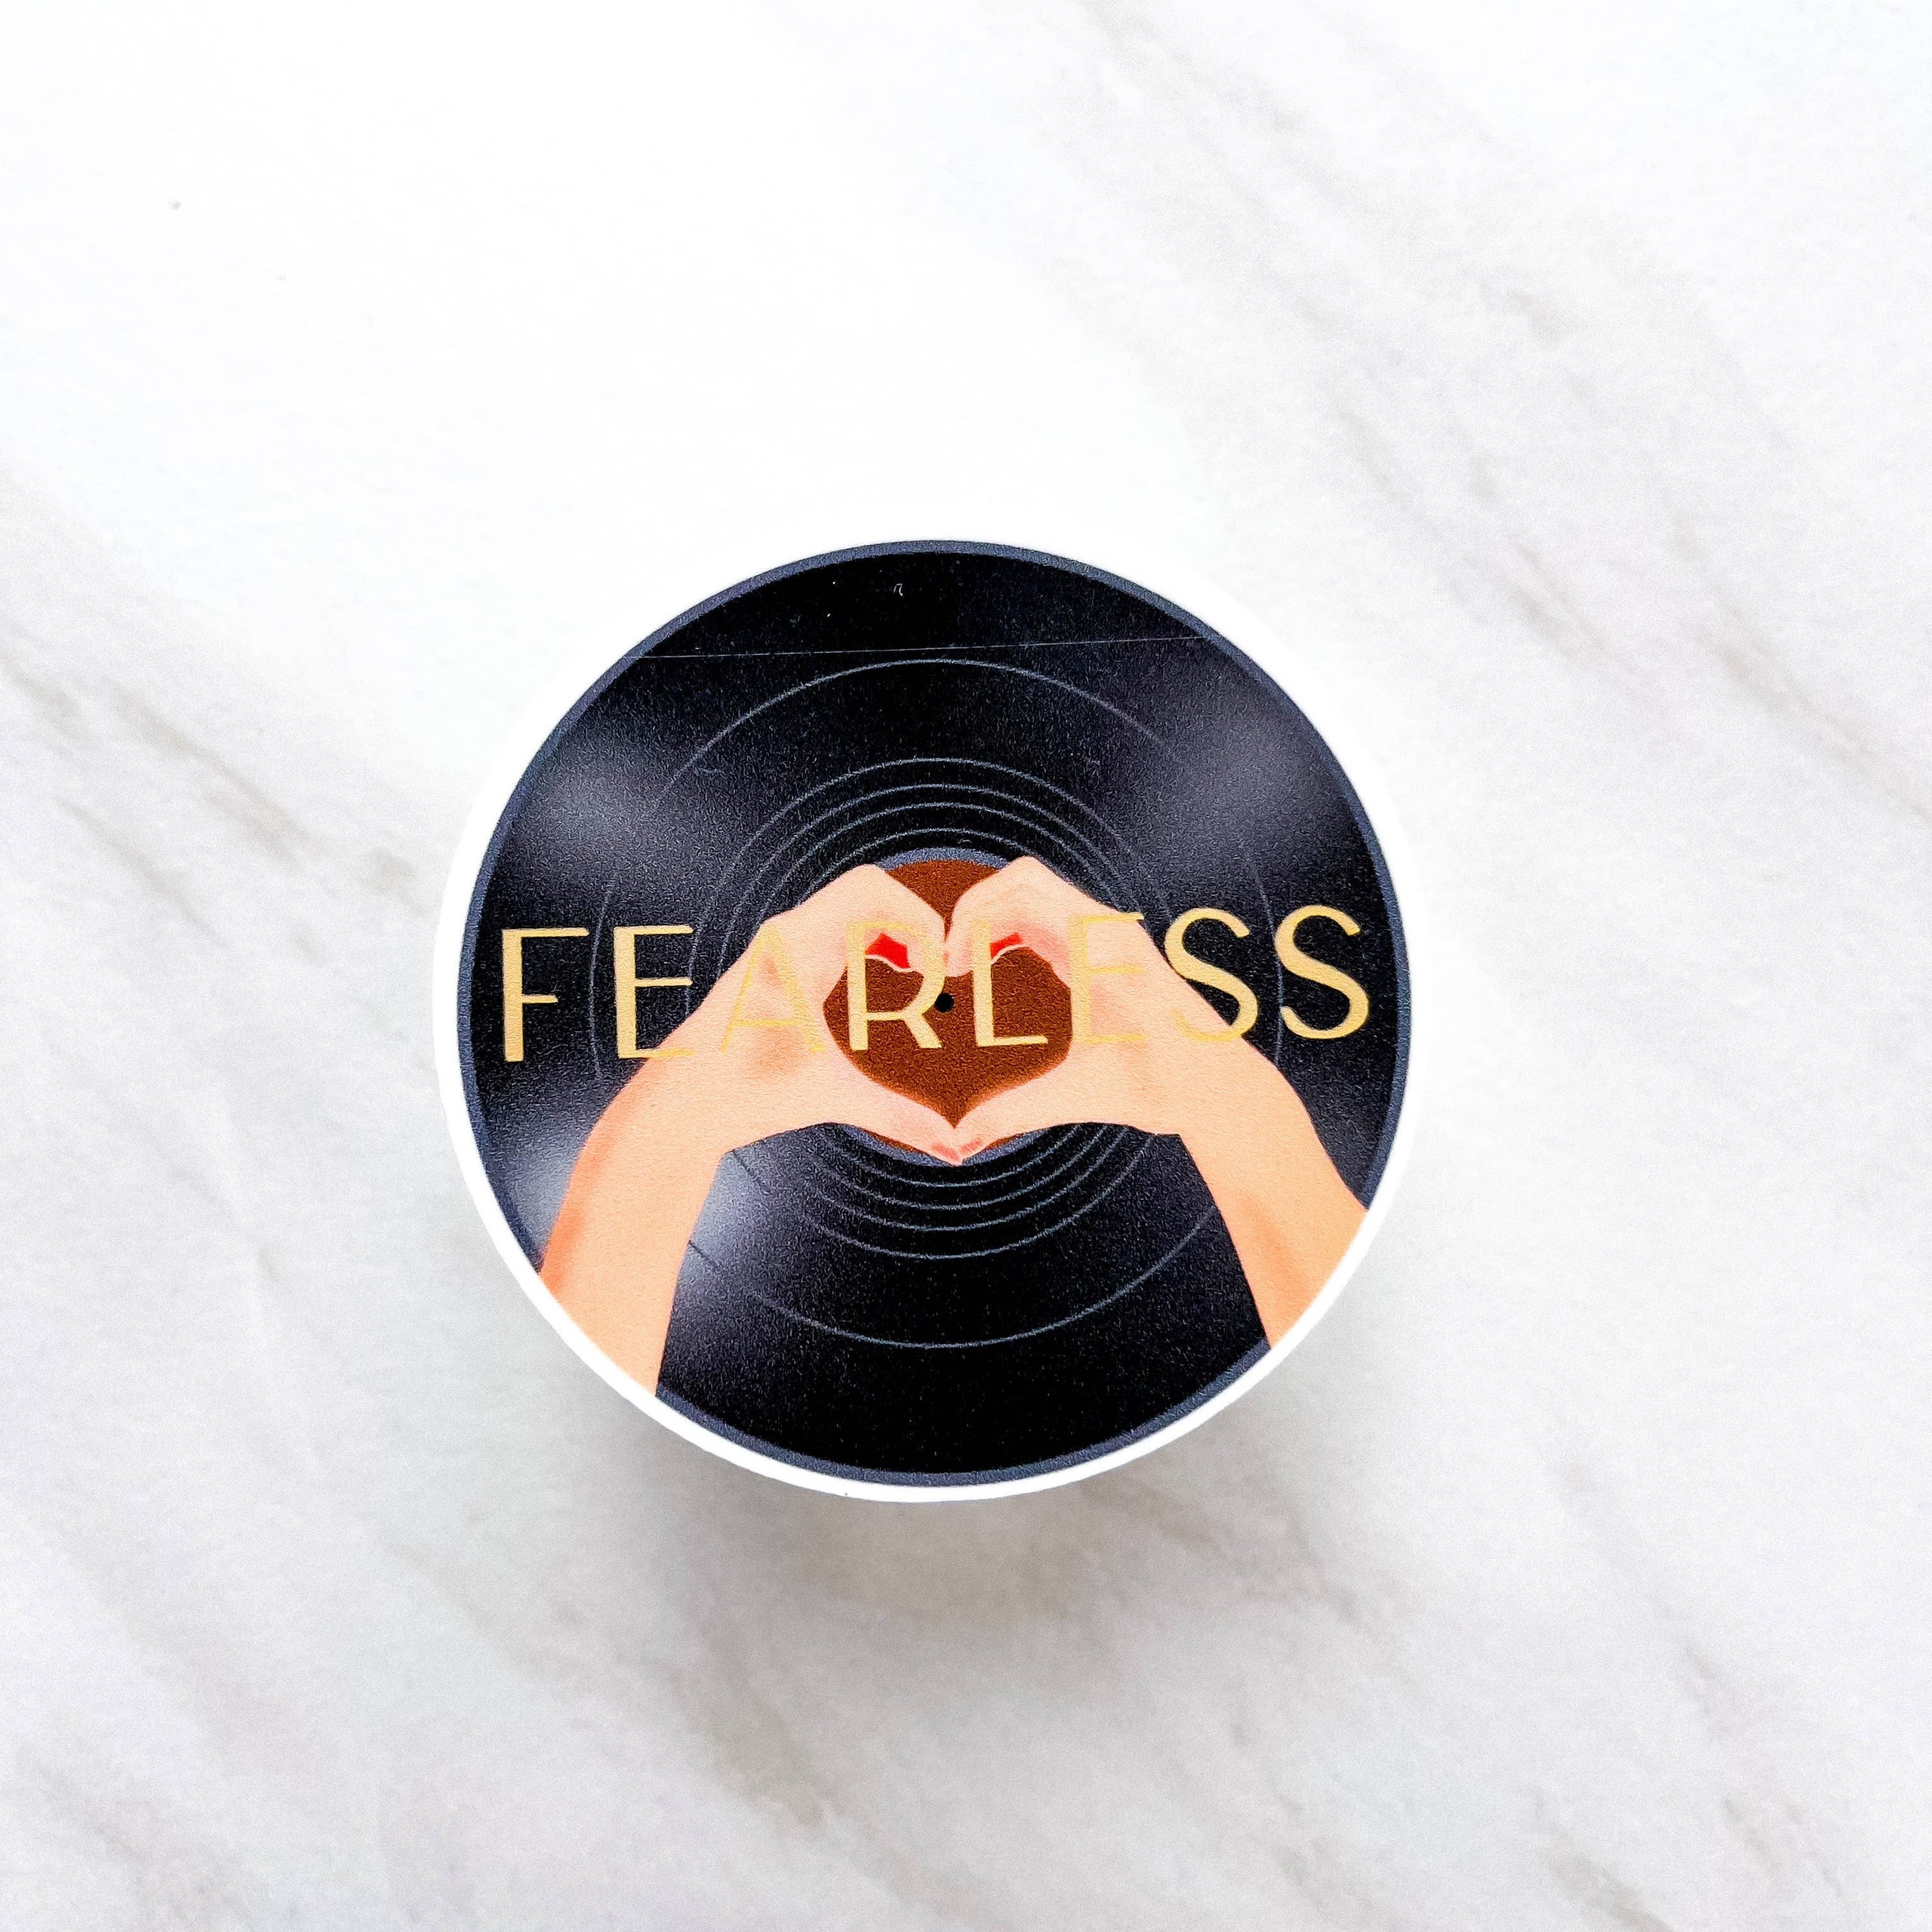 Fearless Vinyl Record Taylor Swift Inspired Sticker